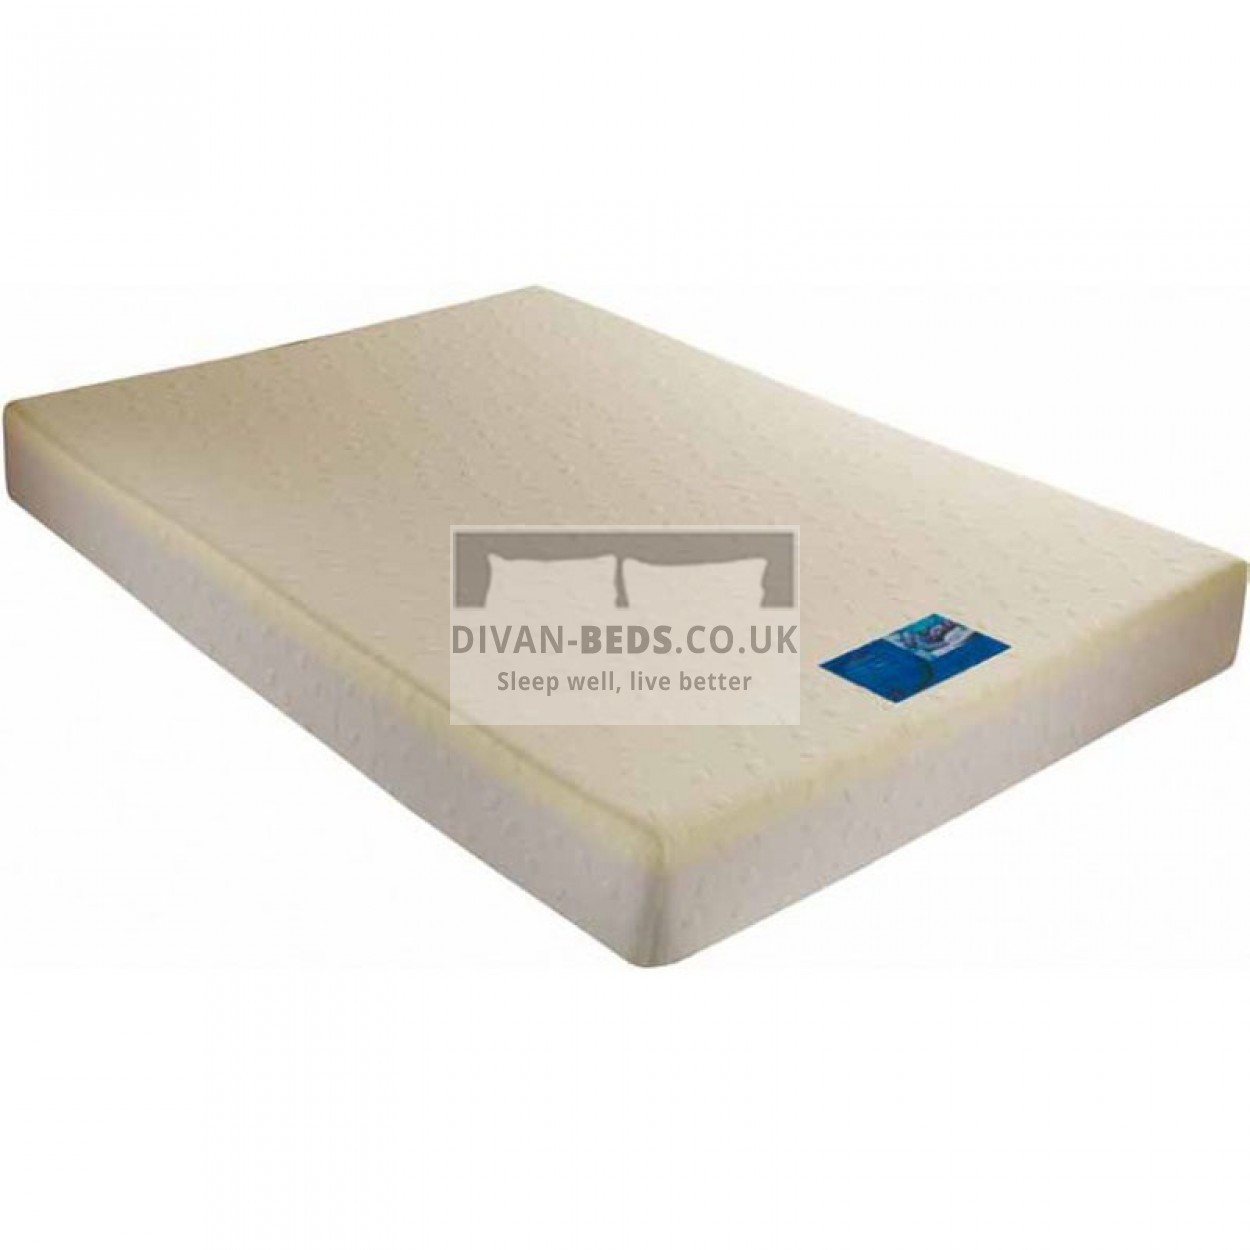 REFLEX ORTHOPAEDIC FOAM MATTRESS SUPPORT FIRM ALL SIZES FREE DELIVERY 